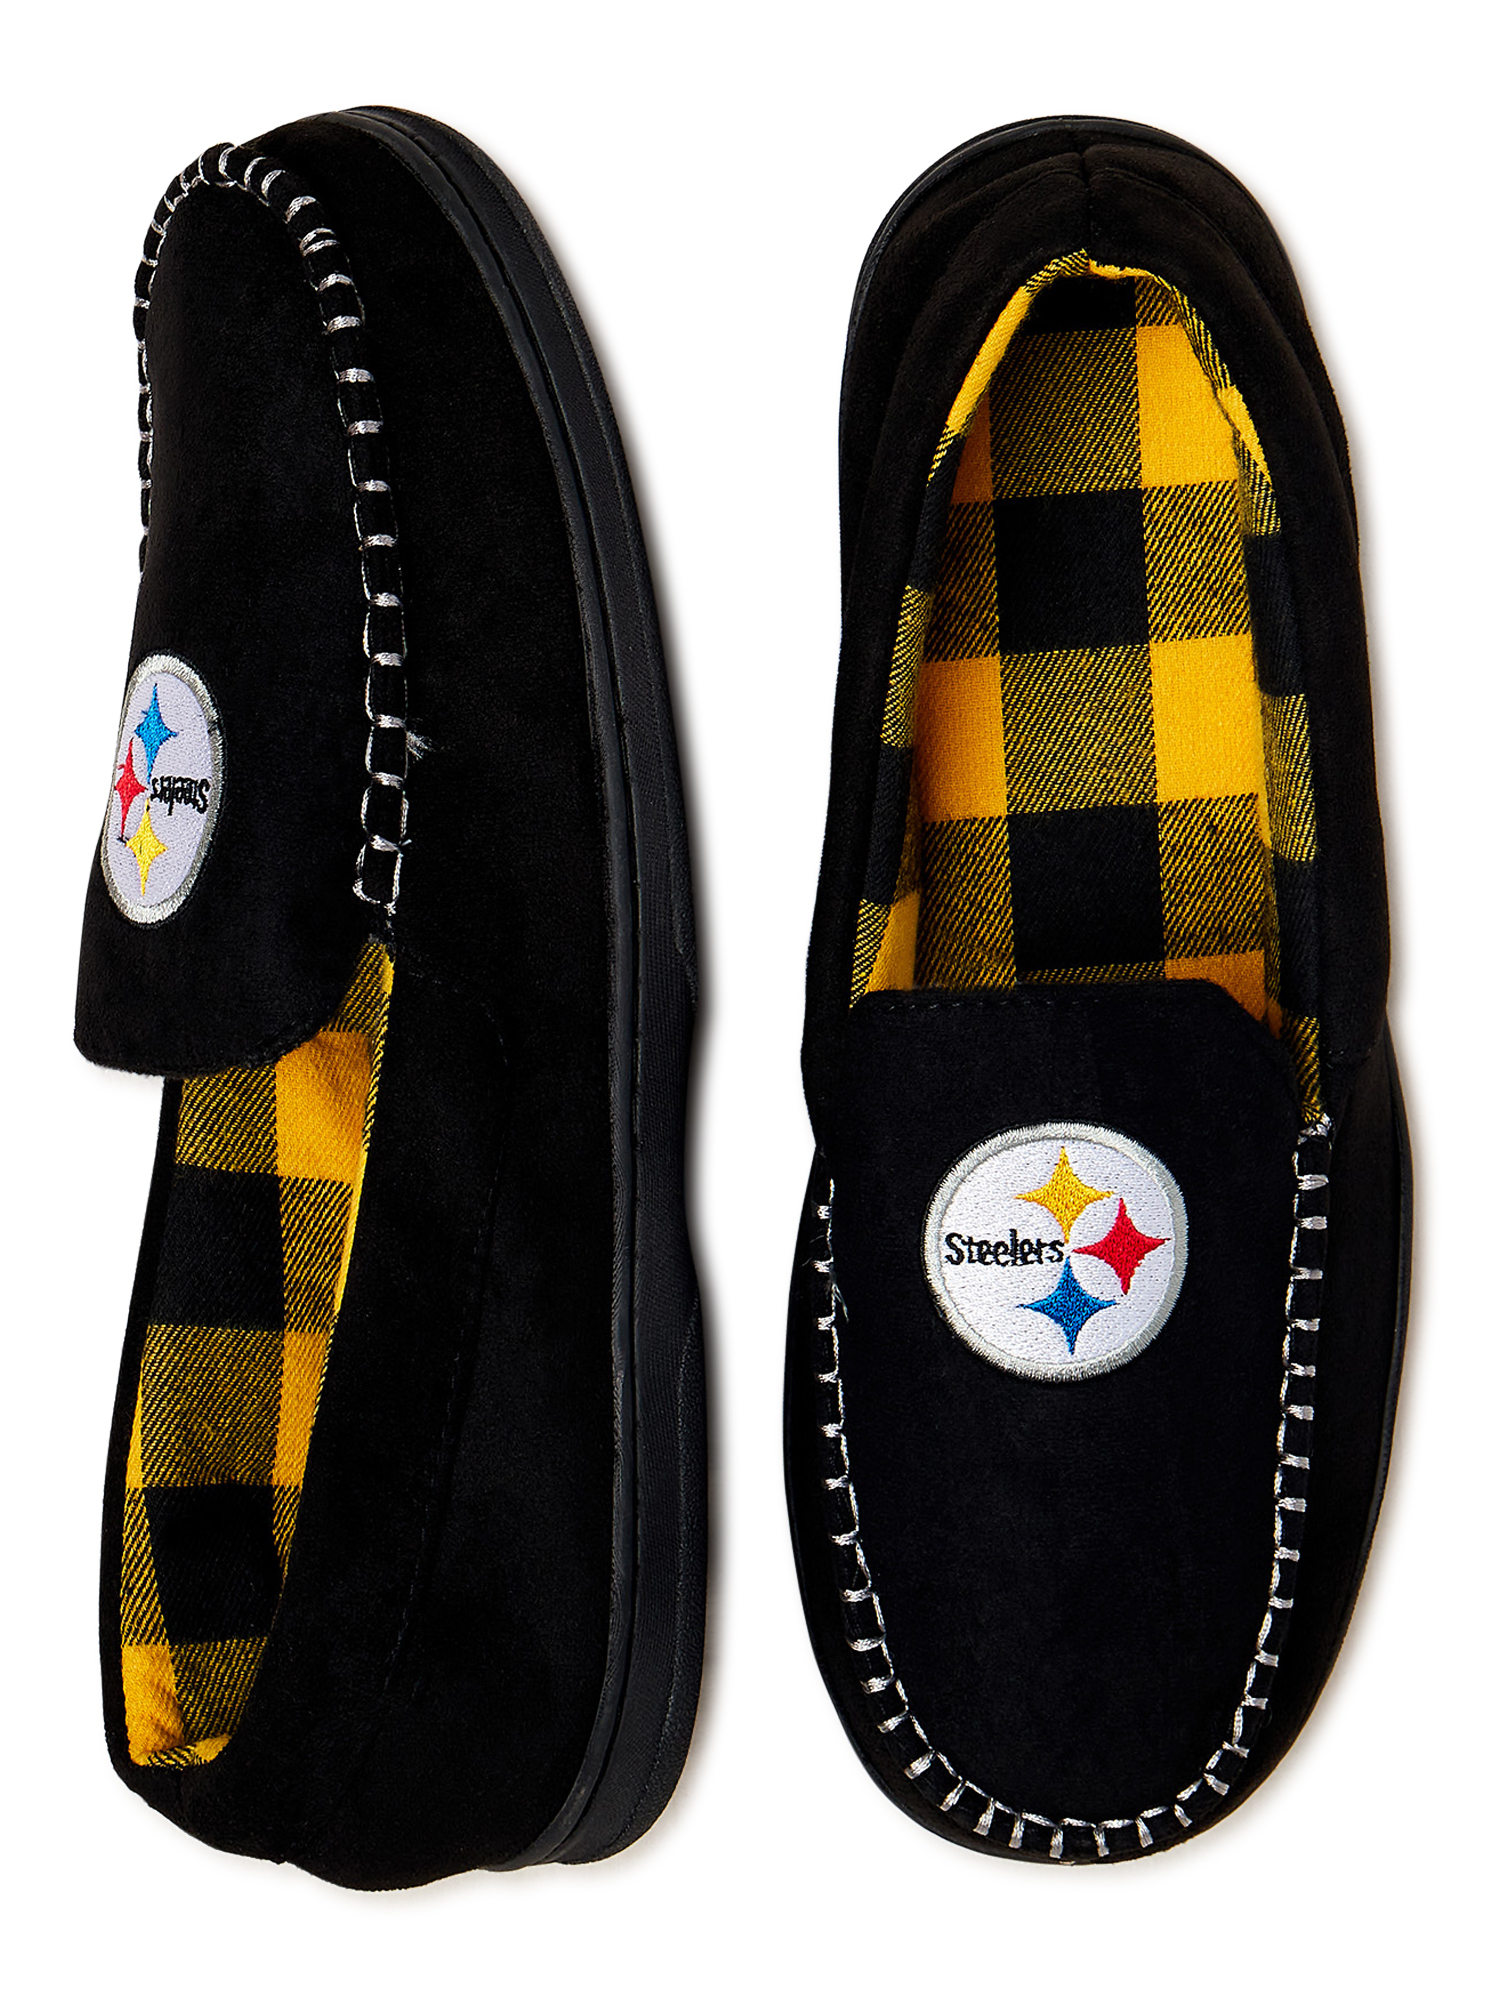 FOCO Pittsburgh Steelers Men's Moccasins with Flannel Liner - Walmart.com